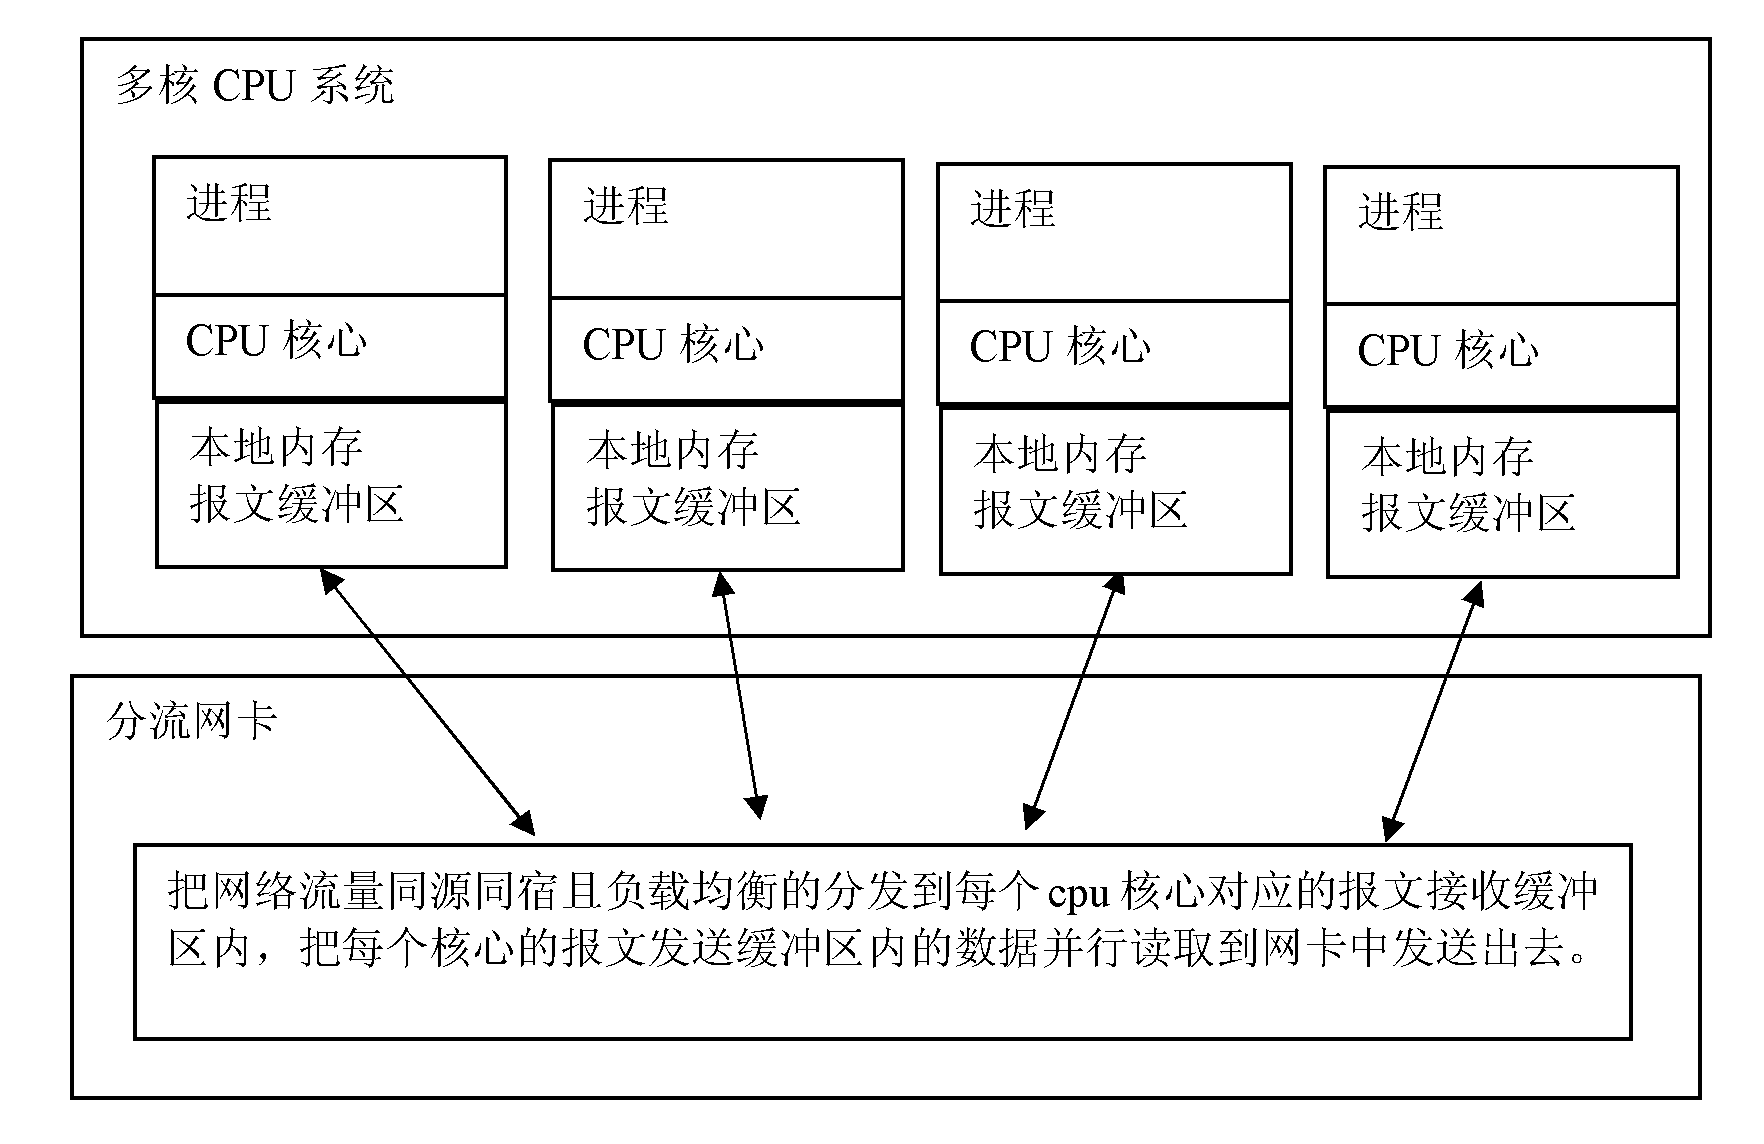 High-speed packet filtering device and method realized based on shunting network card and multi-core CPU (Central Processing Unit)